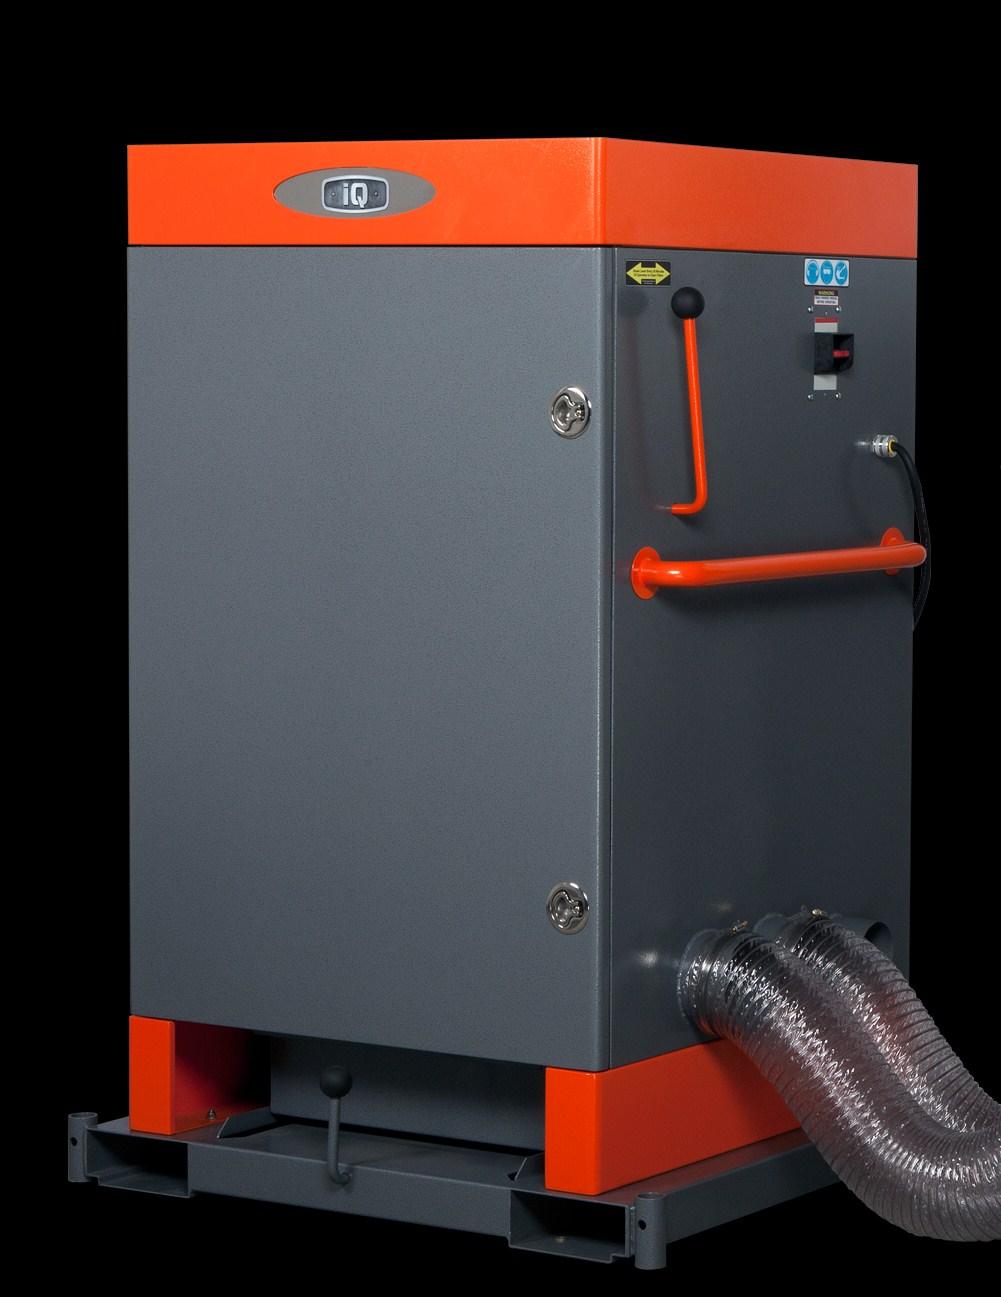 USER S MANUAL Model iq 2000 Series Dust Collector with manual shaker WARNING Read all the following safety and operating instructions prior to using this unit.